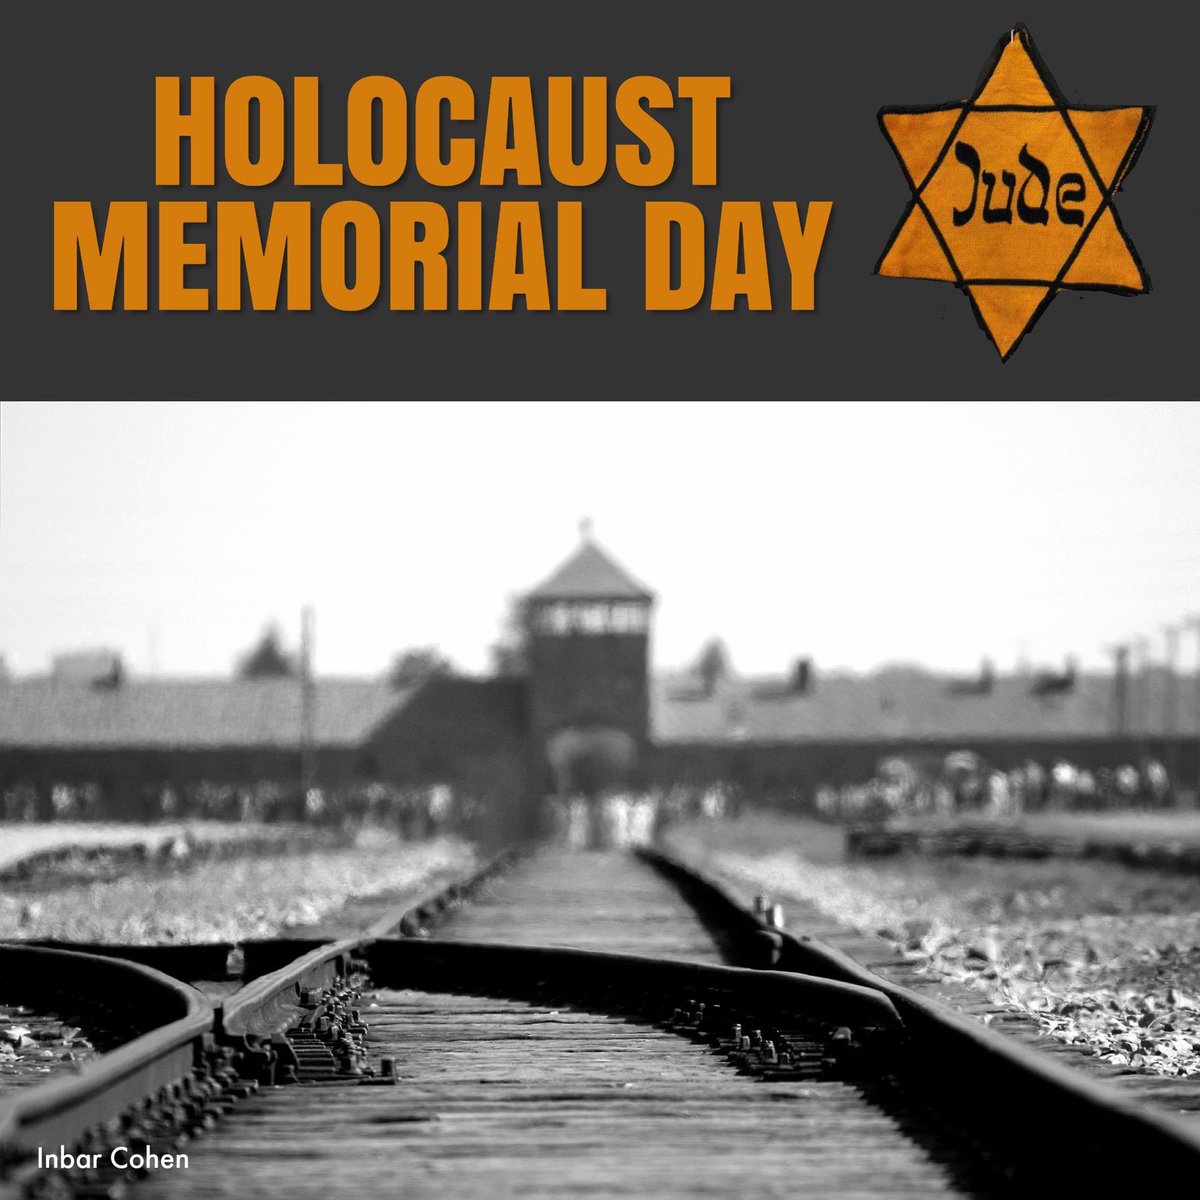 The Holocaust was one of the darkest things in history. Today we remember all those murdered in the Holocaust only because they were born Jewish. 

Never again. 
#InternationalHolocaustMemorialDay